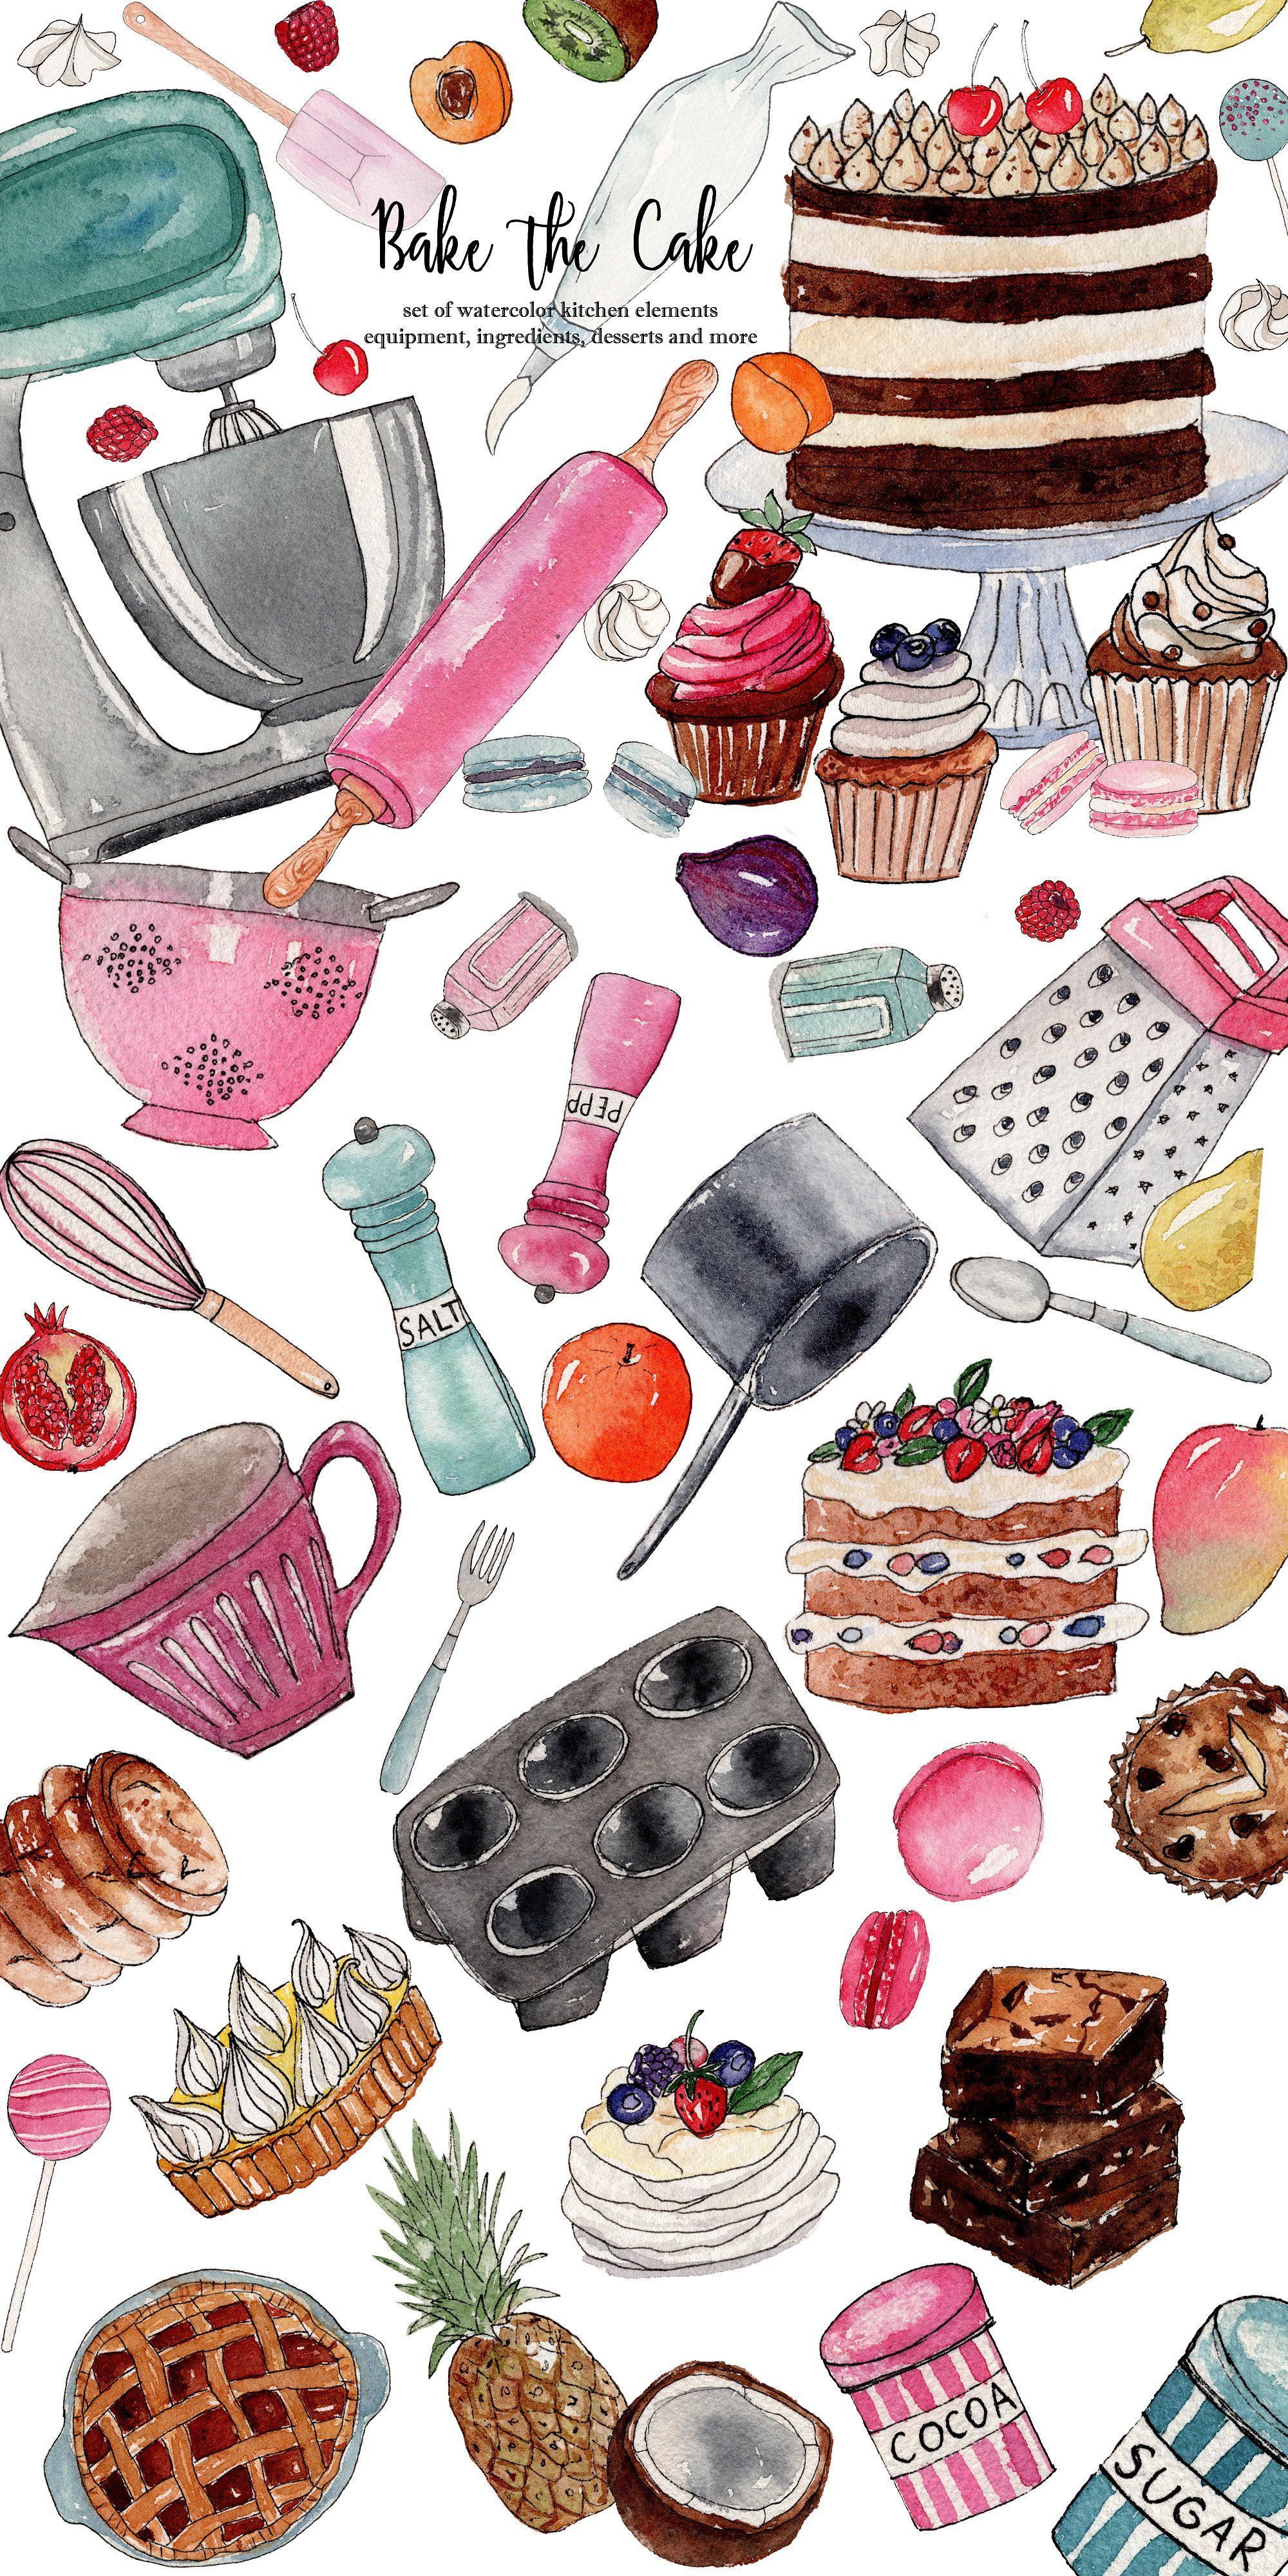 A picture of various baked goods and kitchen items - Bakery